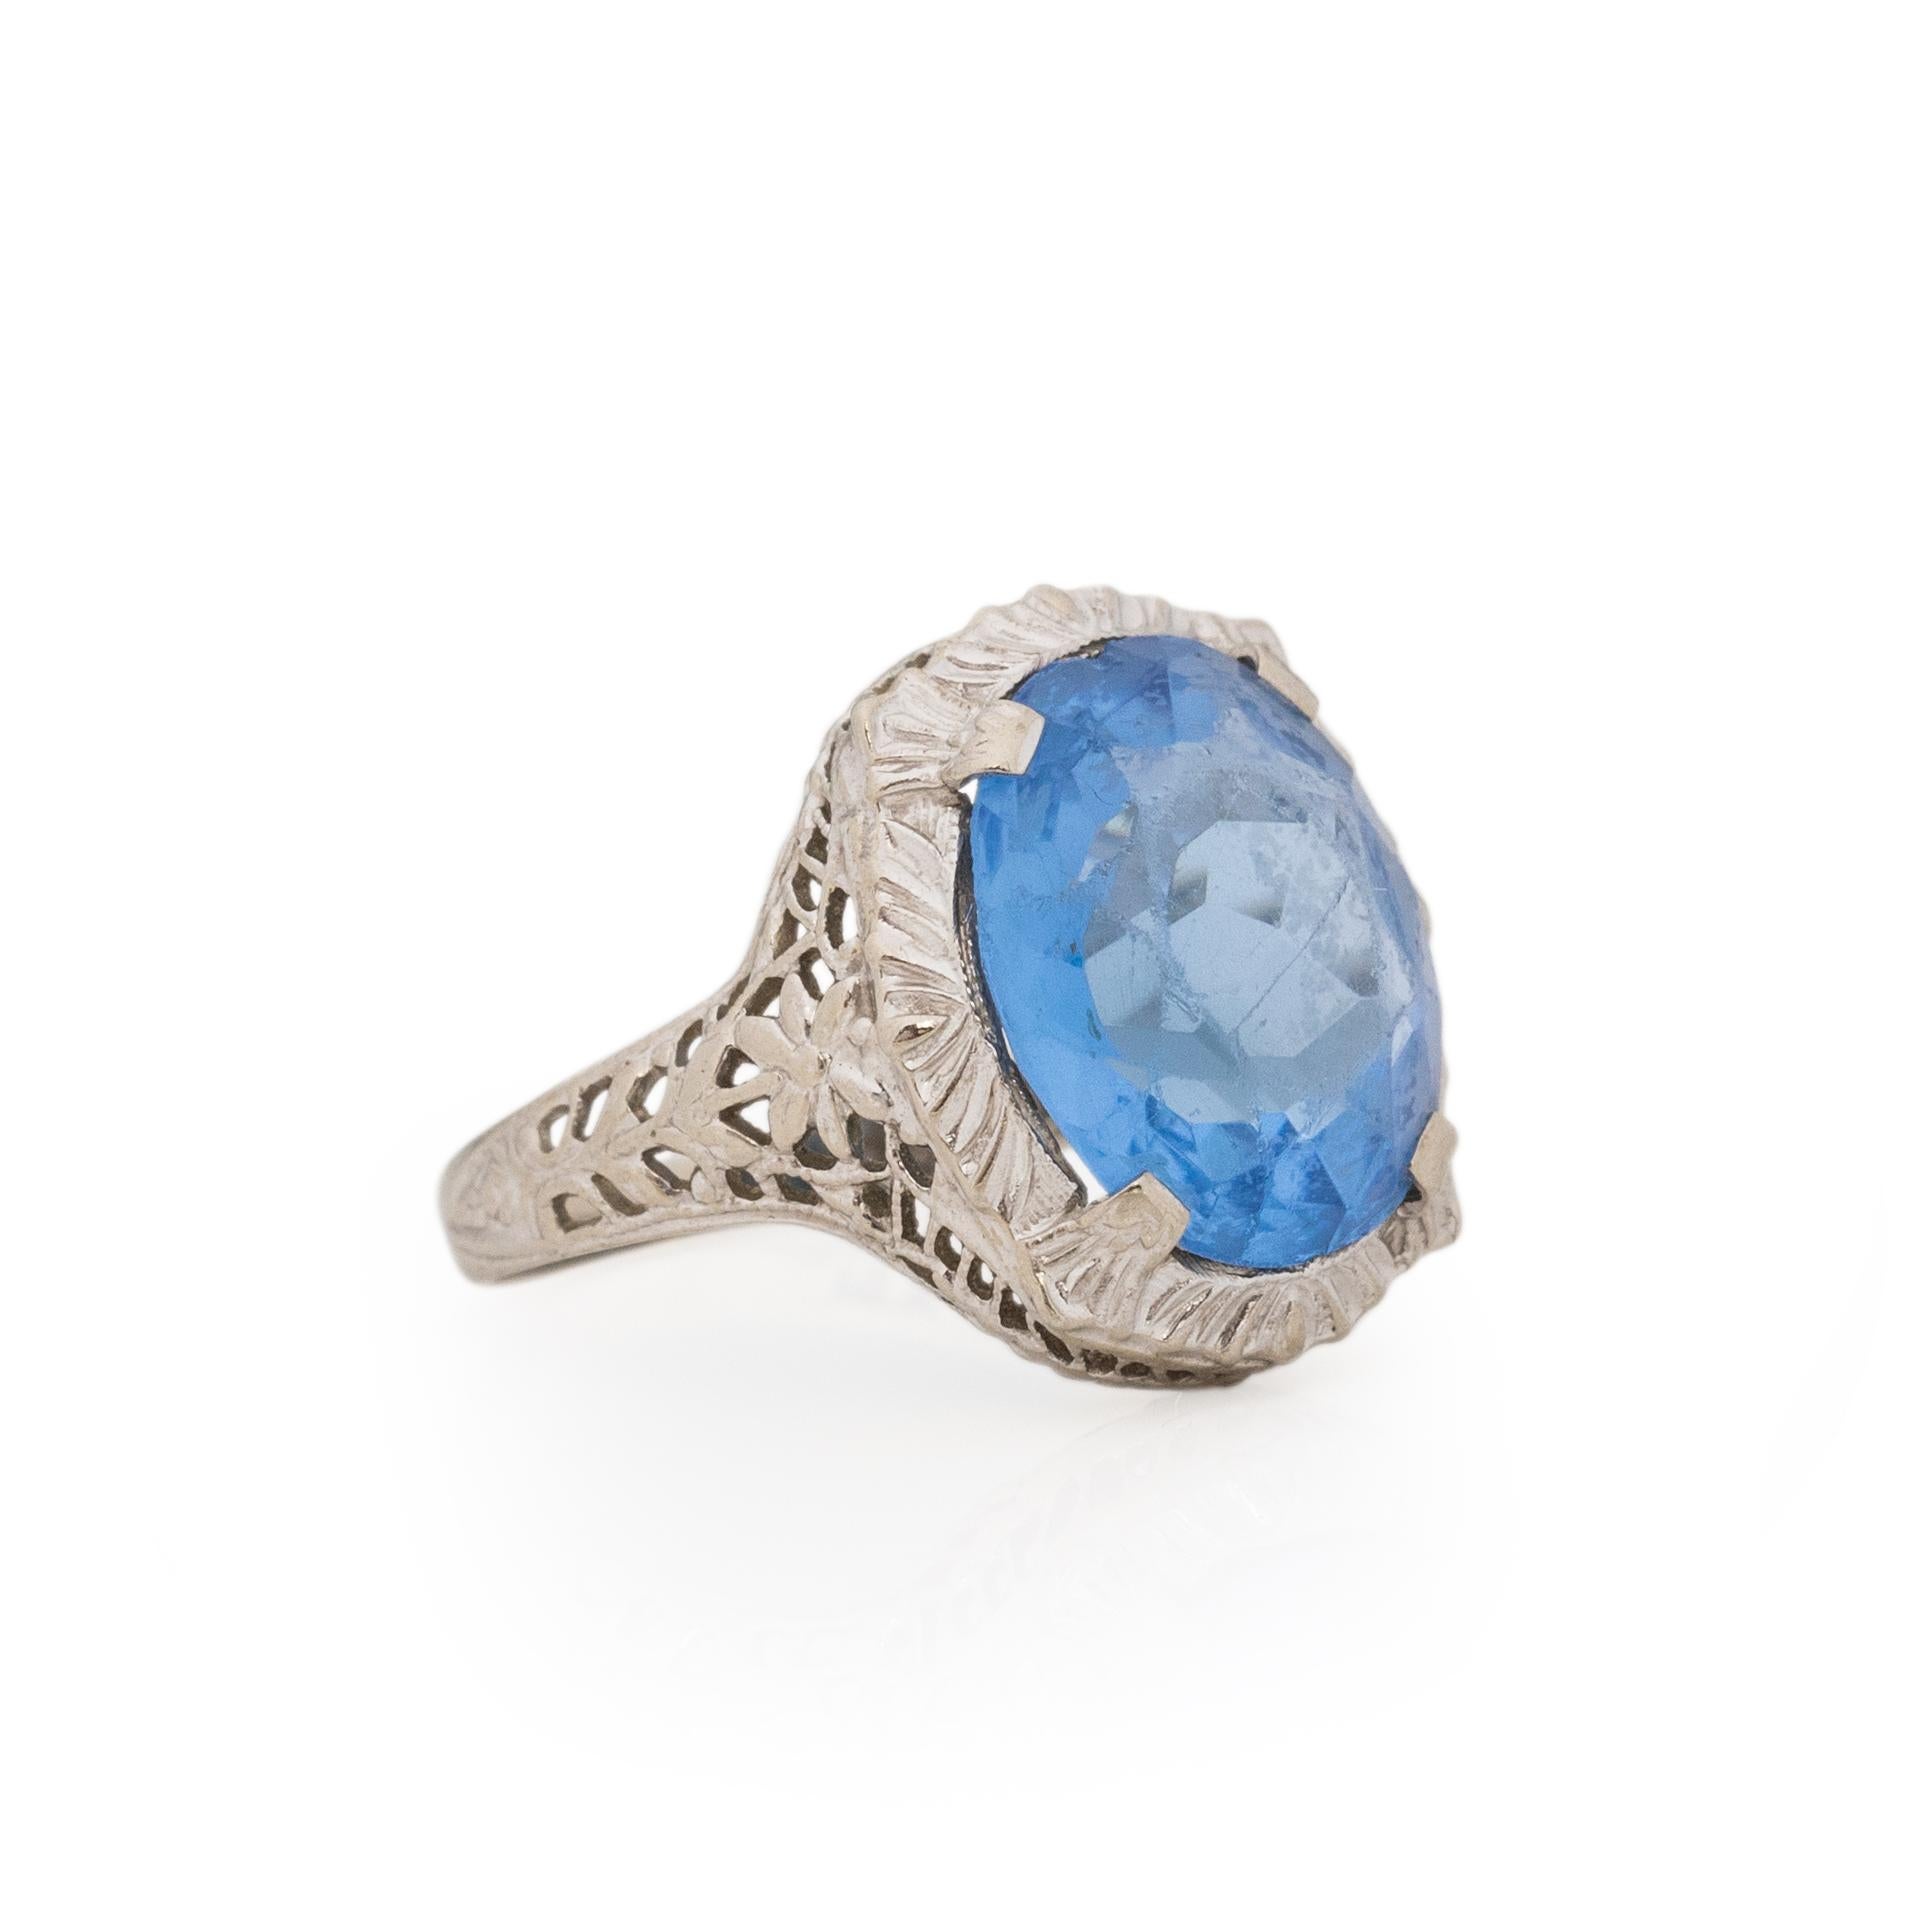 Here we have a art deco classic, in the deco era not everyone could afford, and some did not care if it was a gem or not. The beautiful blue stone is glass, the vibrant color is breathtaking. The facets that are cut in catch the light giving you a